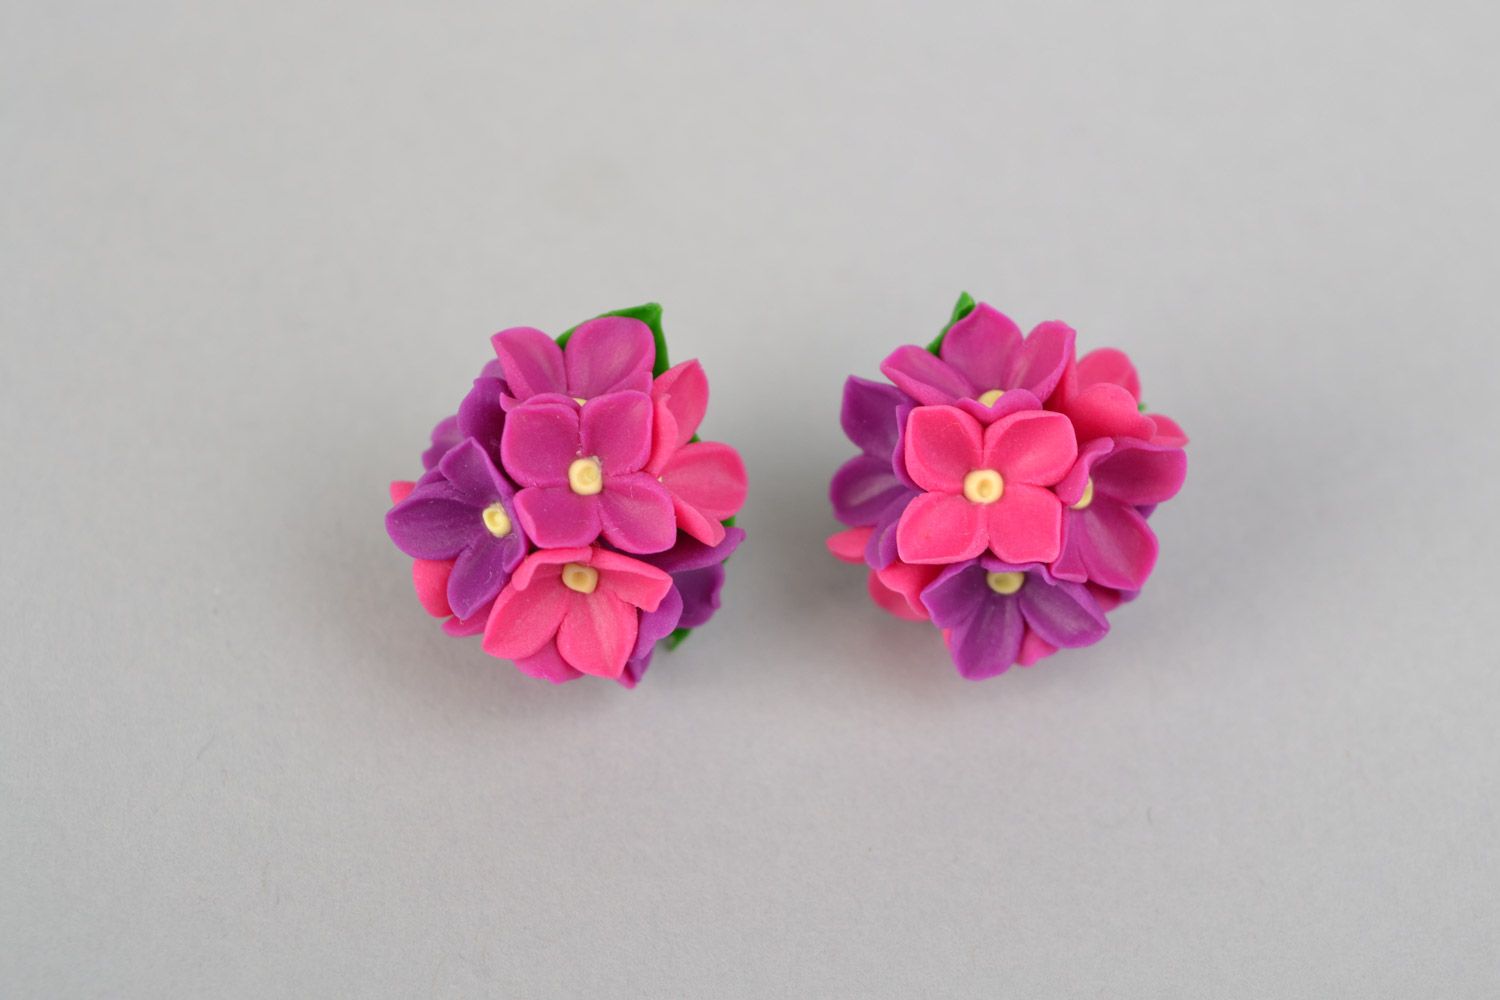 Homemade small stud earrings with bright pink polymer clay flower bouquets photo 3